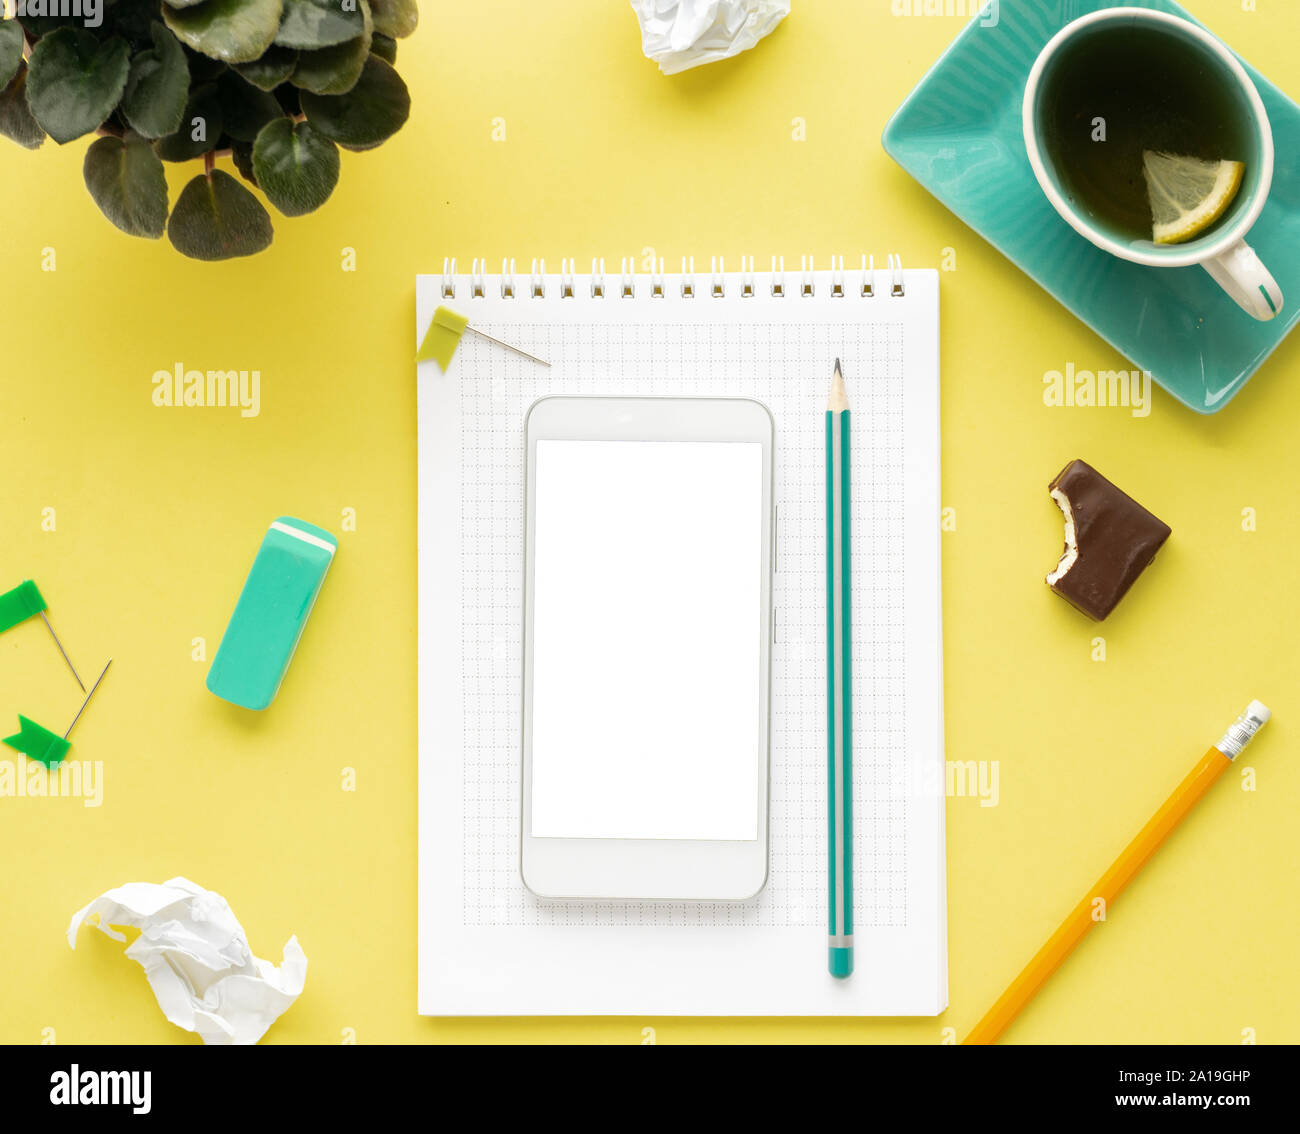 Download Top View Workspace Mockup On Yellow Background With Notebook Pen Tea Clips And Accessories Stock Photo Alamy PSD Mockup Templates